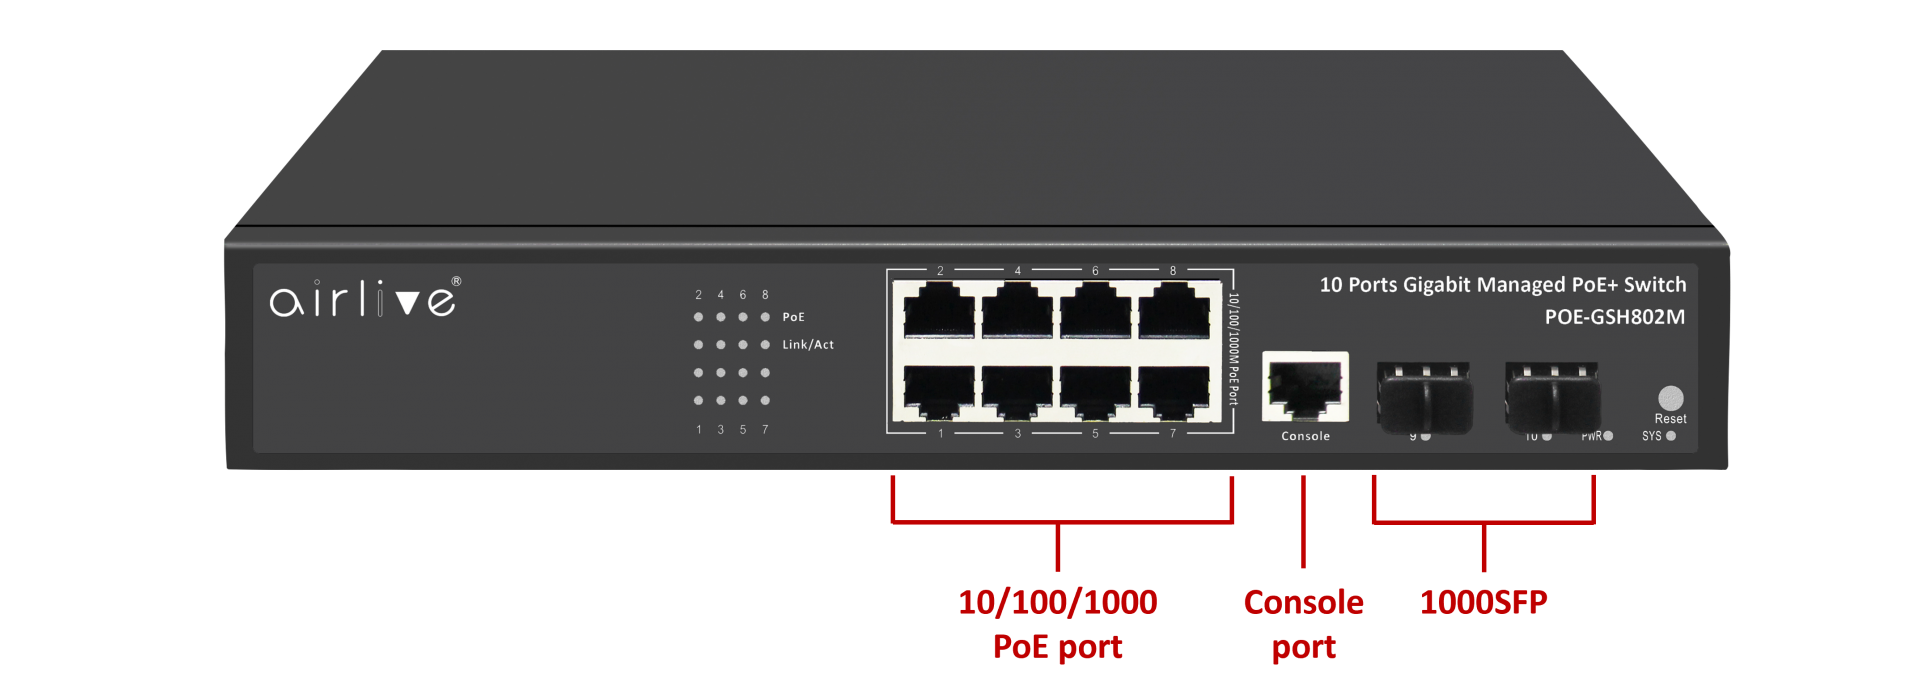 SNMP & PoE managed Switch with Advanced VLAN Policy for Video Conferring | Surveillance | Voice | Data